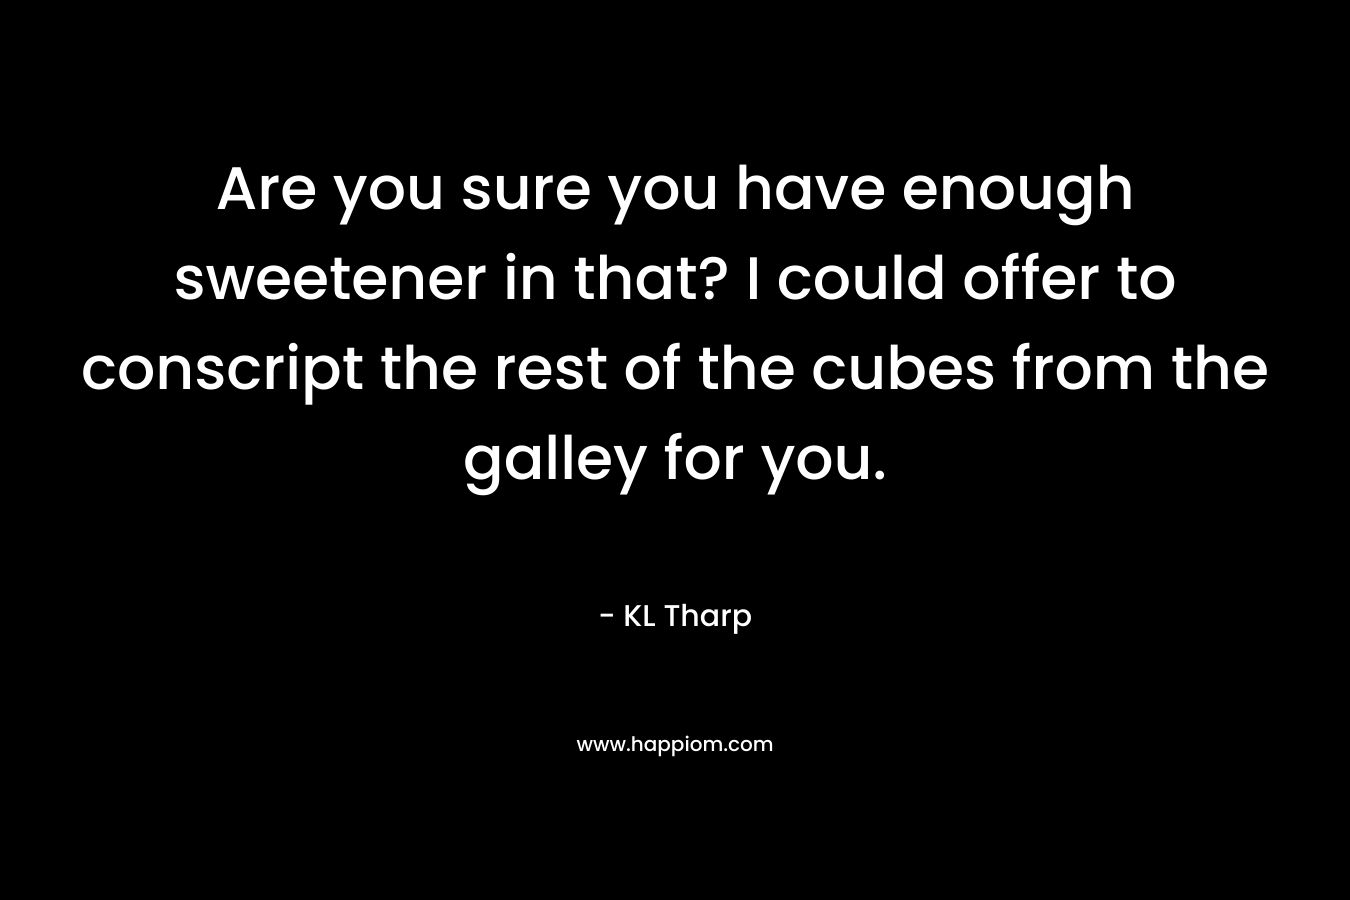 Are you sure you have enough sweetener in that? I could offer to conscript the rest of the cubes from the galley for you. – KL Tharp